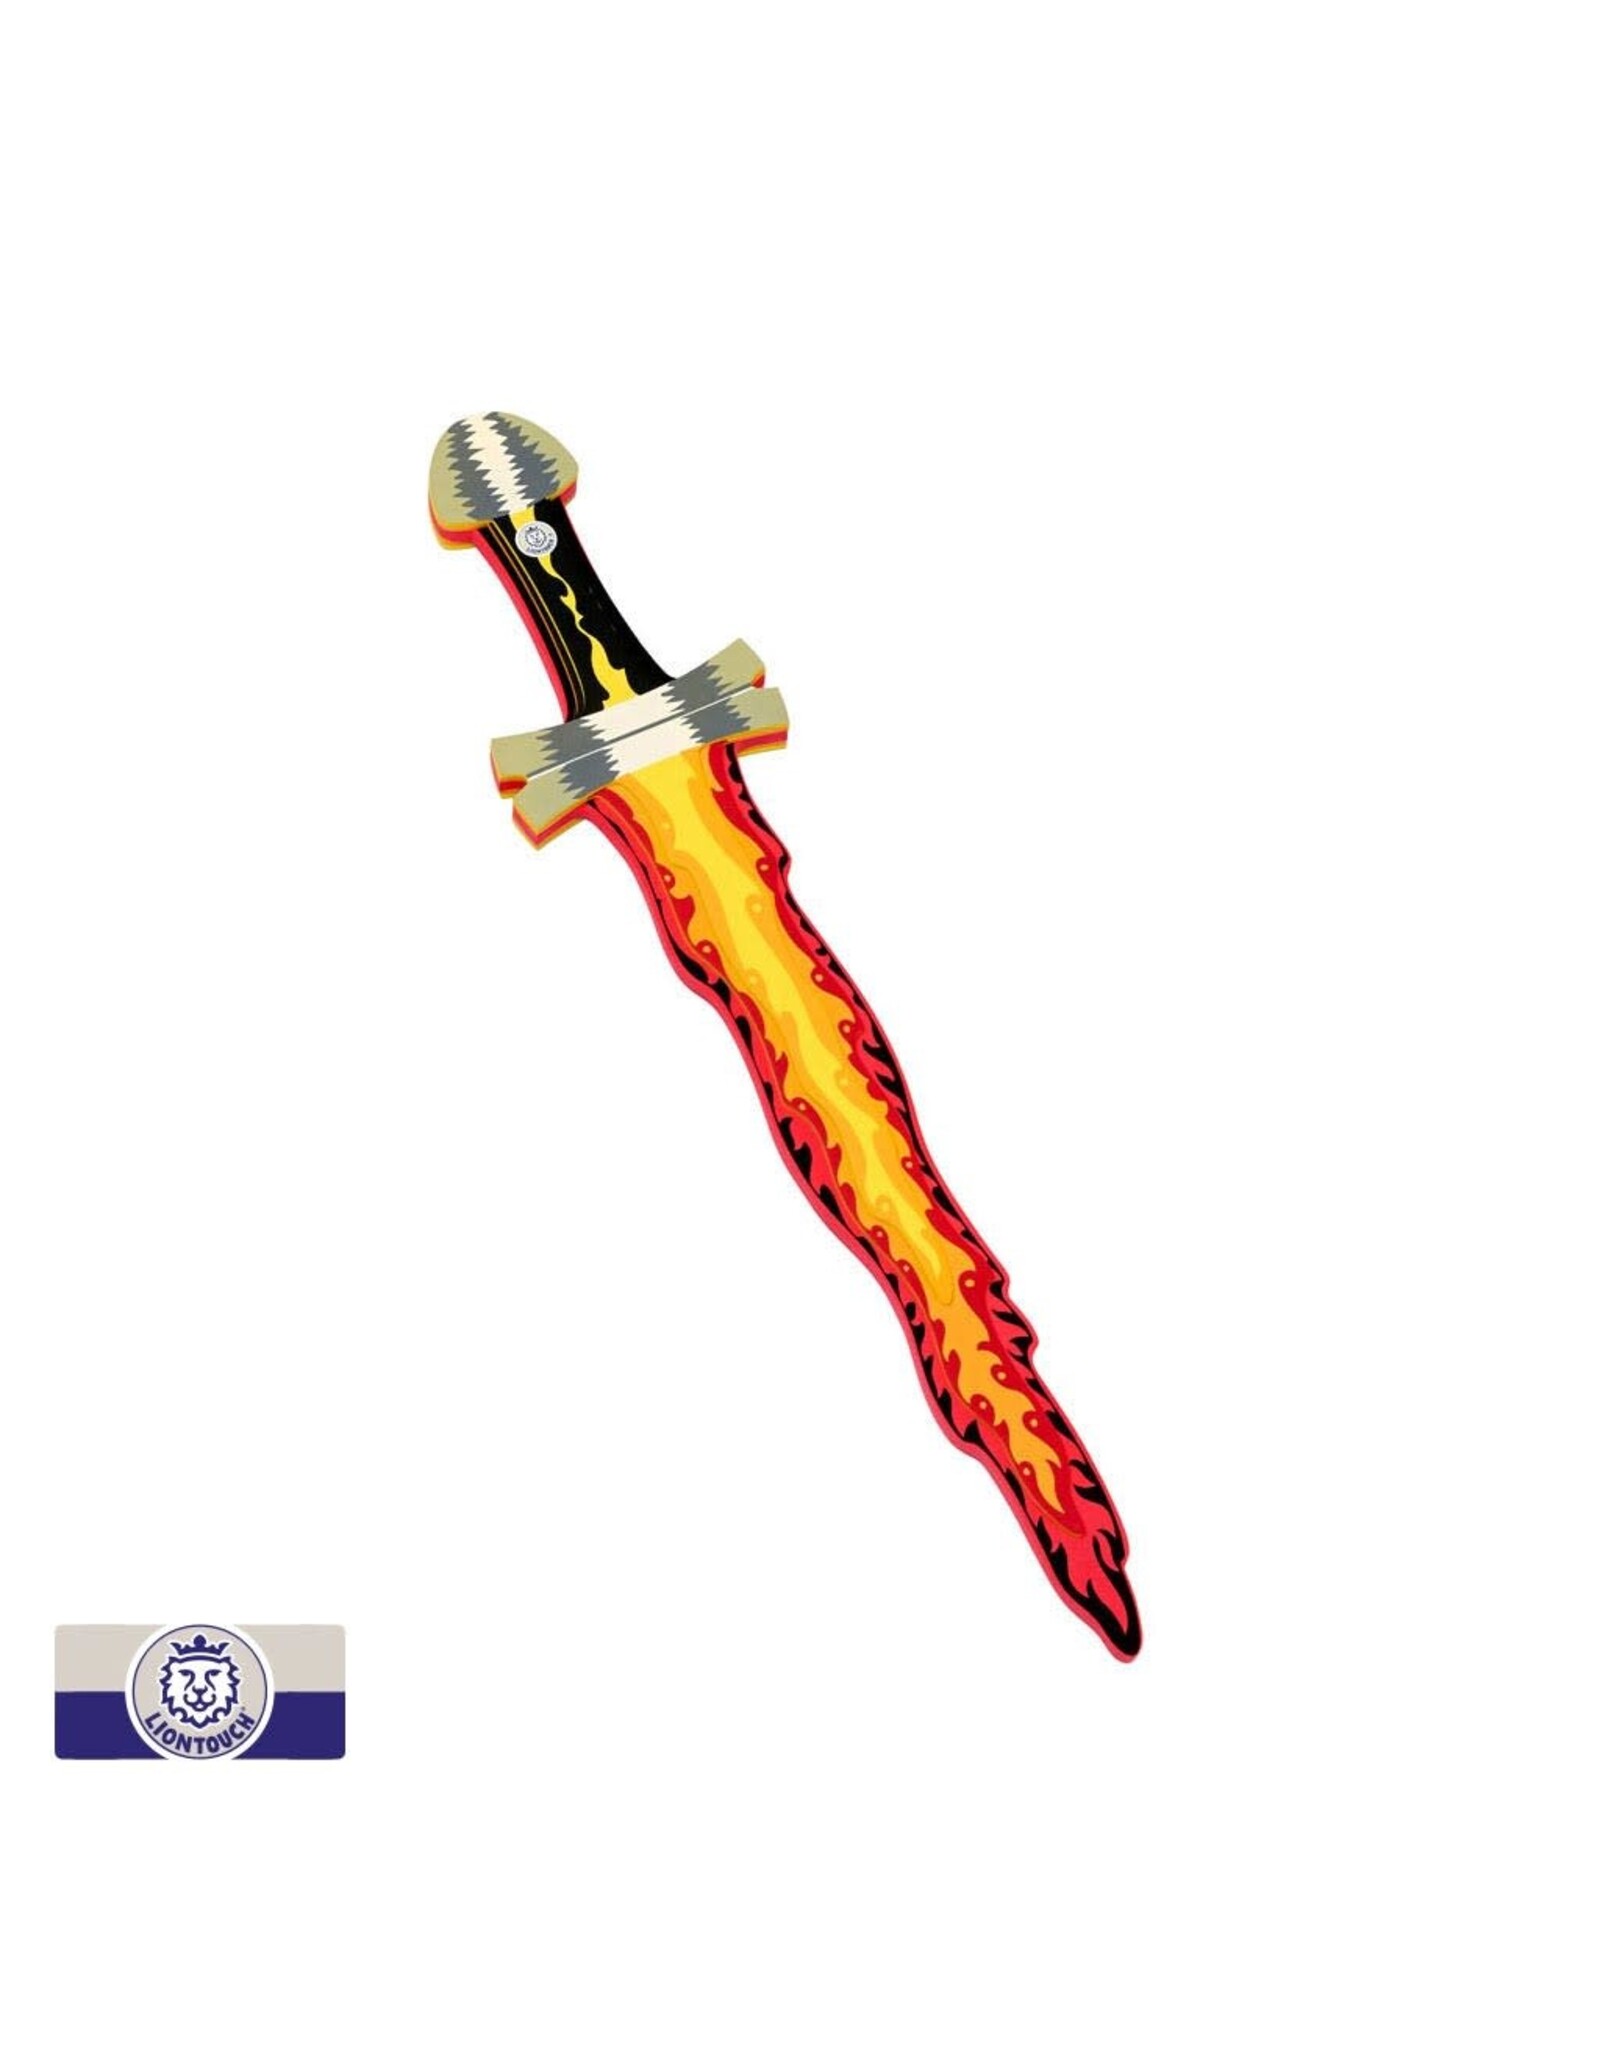 Liontouch Fantasy Flame Sword